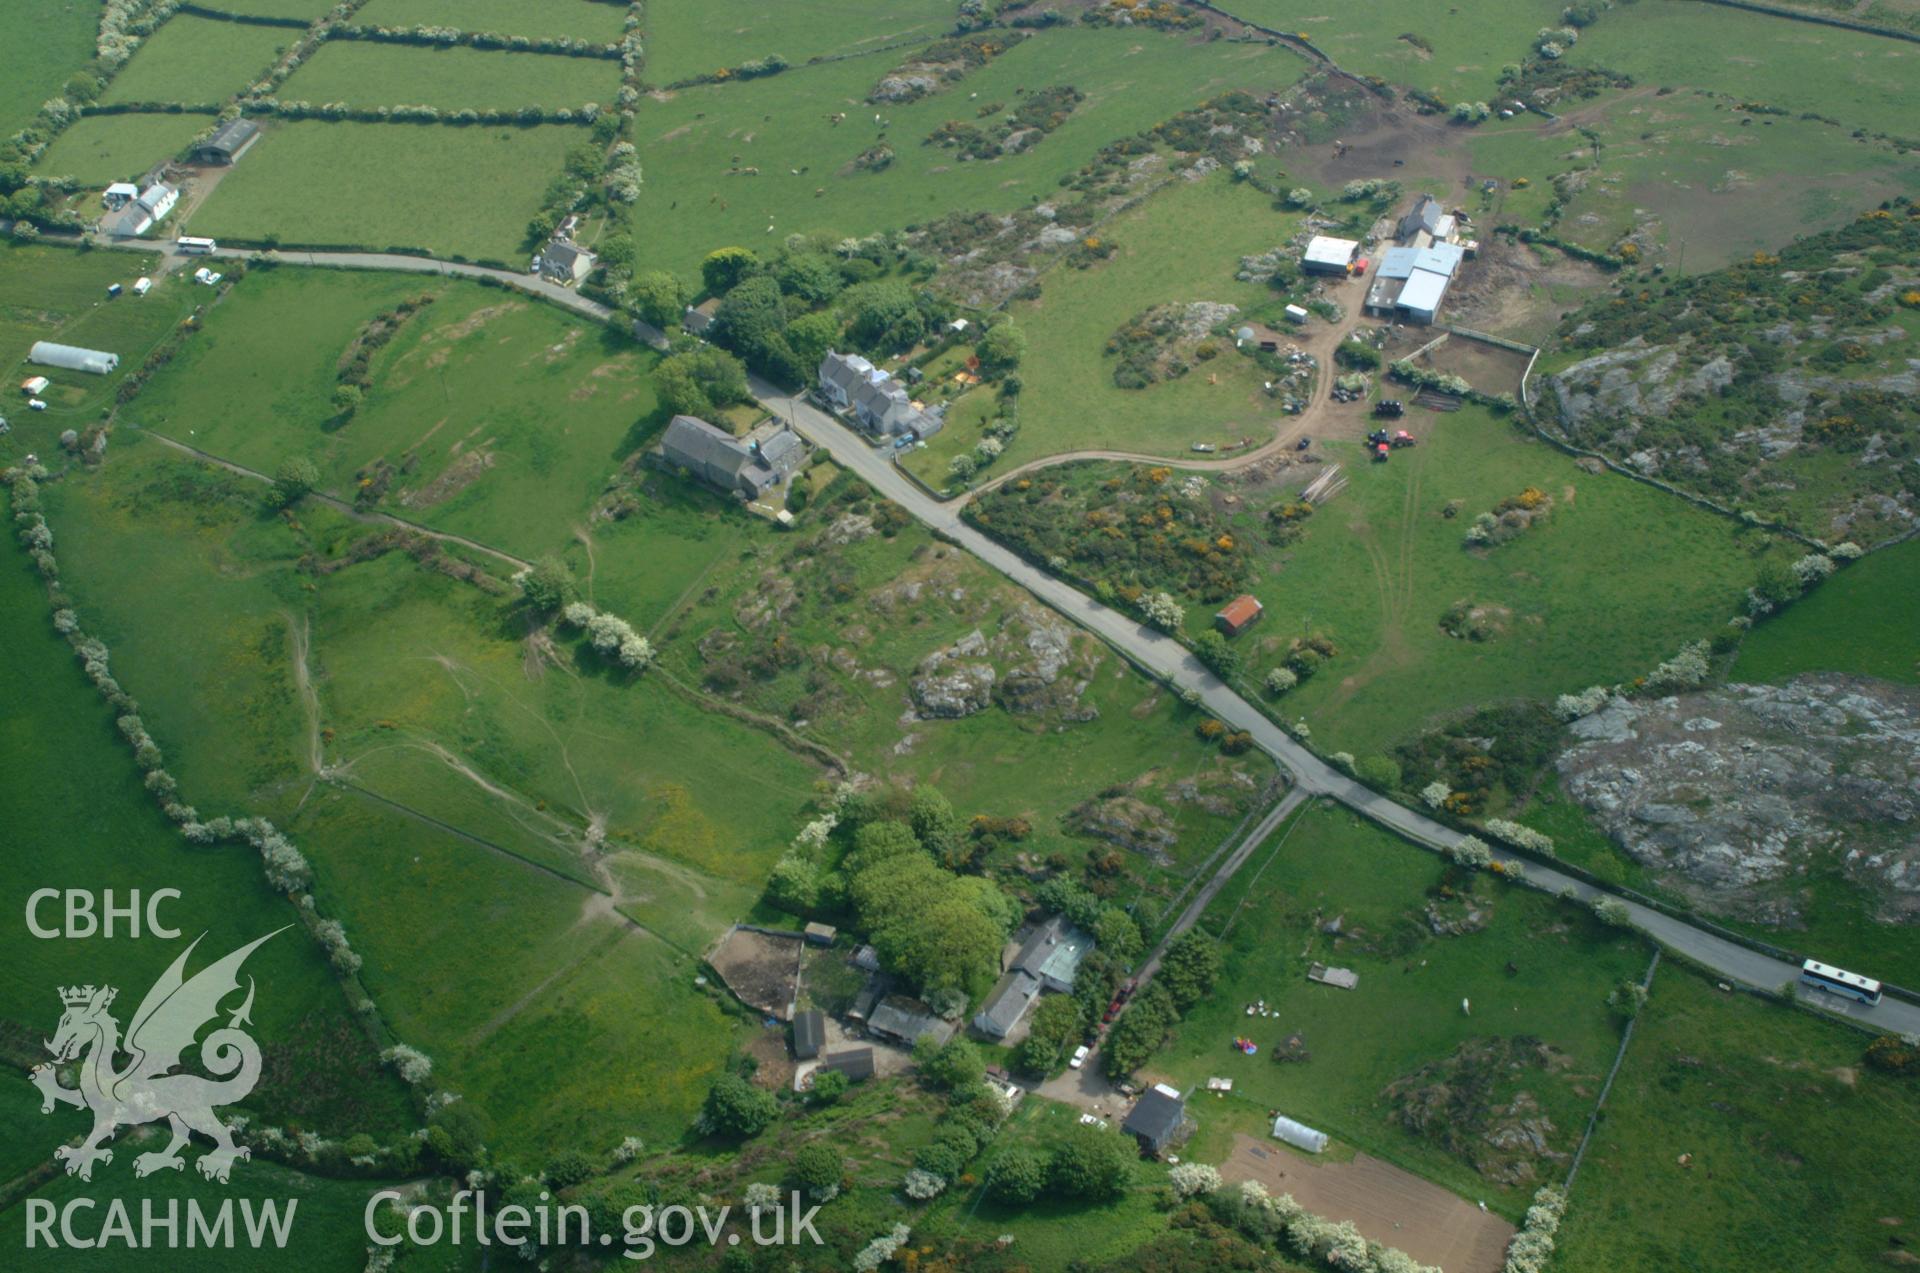 RCAHMW colour oblique aerial photograph of Seion Independent Chapel, Carregl-efn taken on 26/05/2004 by Toby Driver